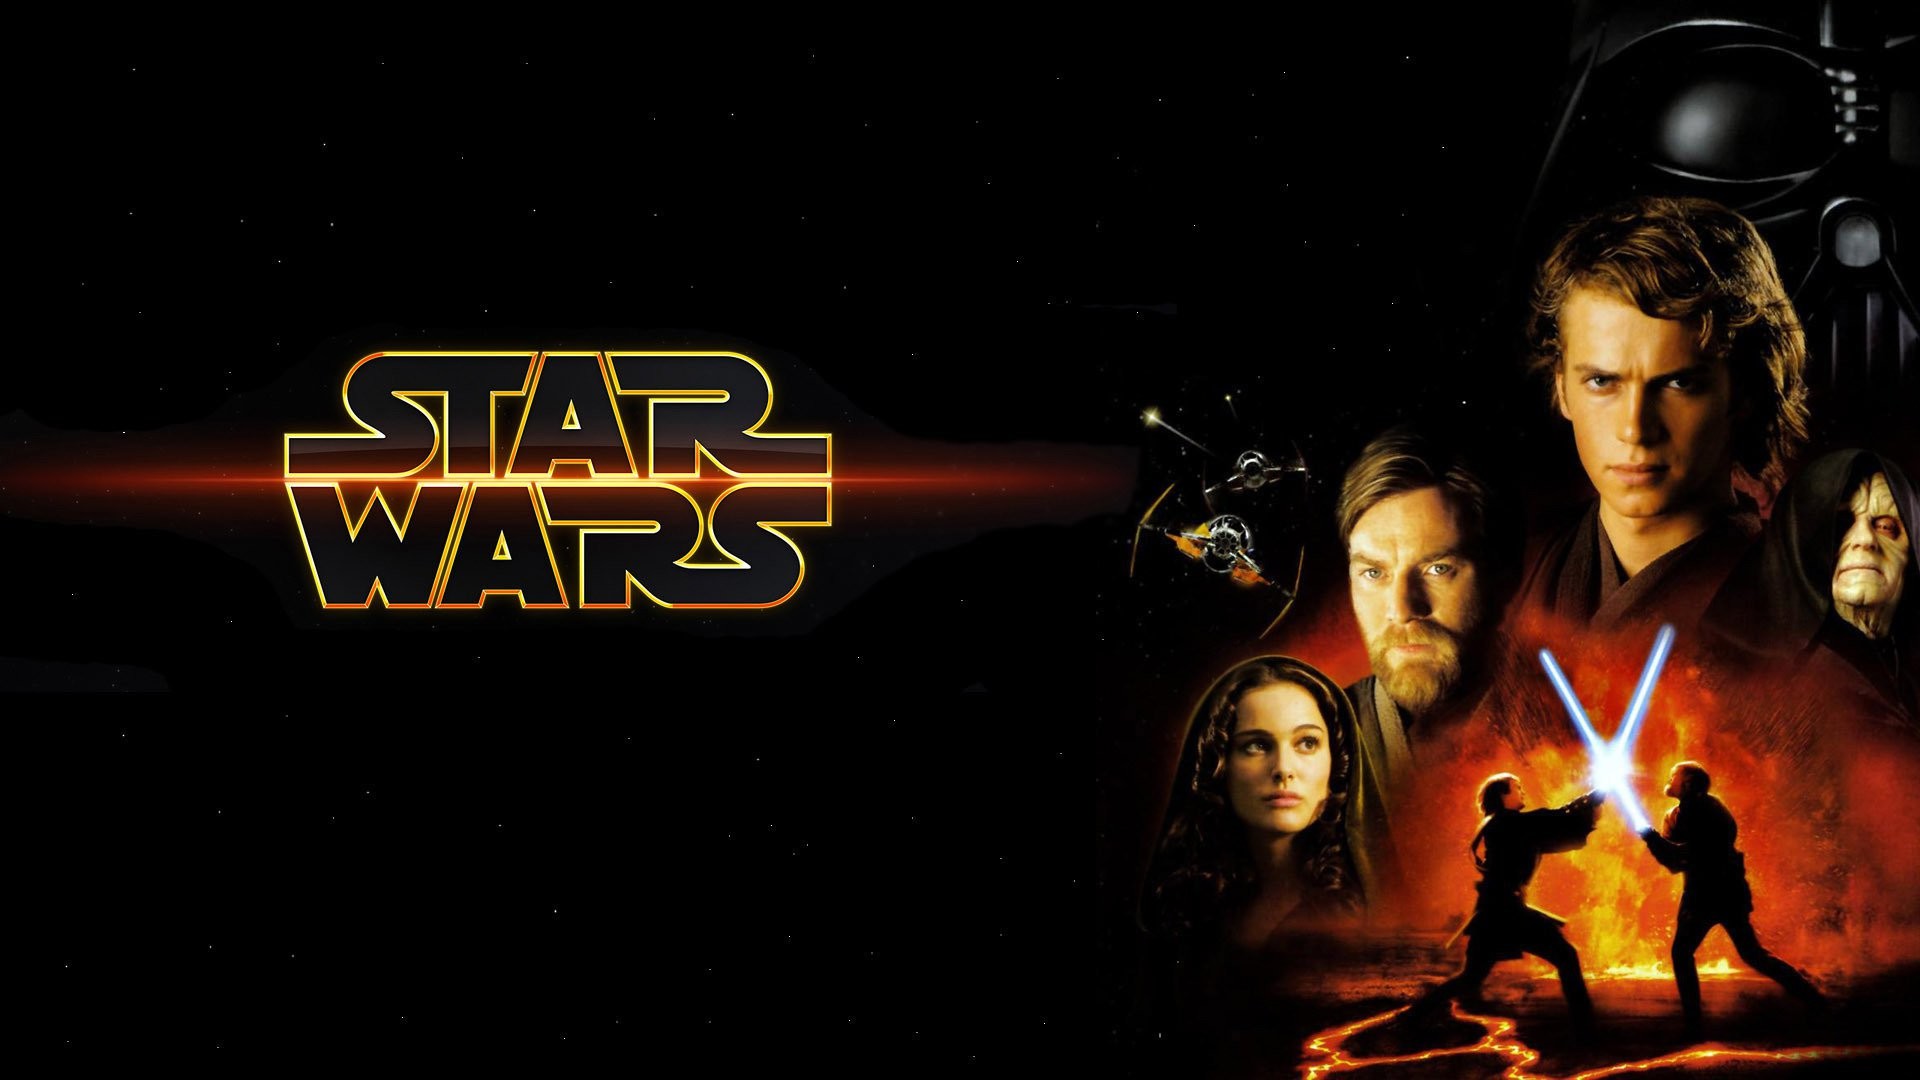 1920x1080 Star Wars Episode III: Revenge of the Sith HD Wallpaper | Background Image  |  | ID:769880 - Wallpaper Abyss